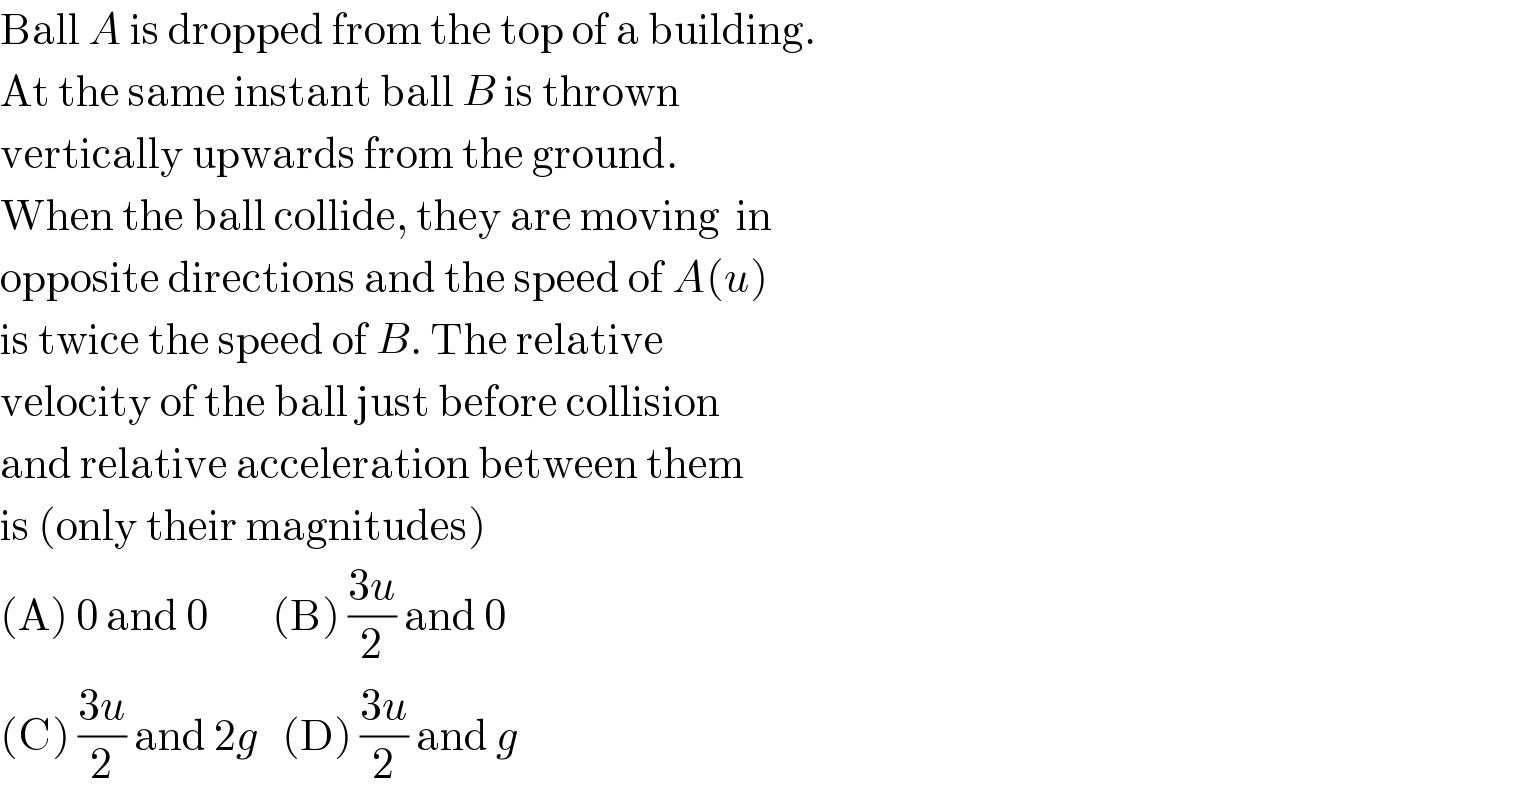 Ball A is dropped from the top of a building.  At the same instant ball B is thrown  vertically upwards from the ground.  When the ball collide, they are moving  in  opposite directions and the speed of A(u)  is twice the speed of B. The relative   velocity of the ball just before collision  and relative acceleration between them  is (only their magnitudes)  (A) 0 and 0        (B) ((3u)/2) and 0  (C) ((3u)/2) and 2g   (D) ((3u)/2) and g  